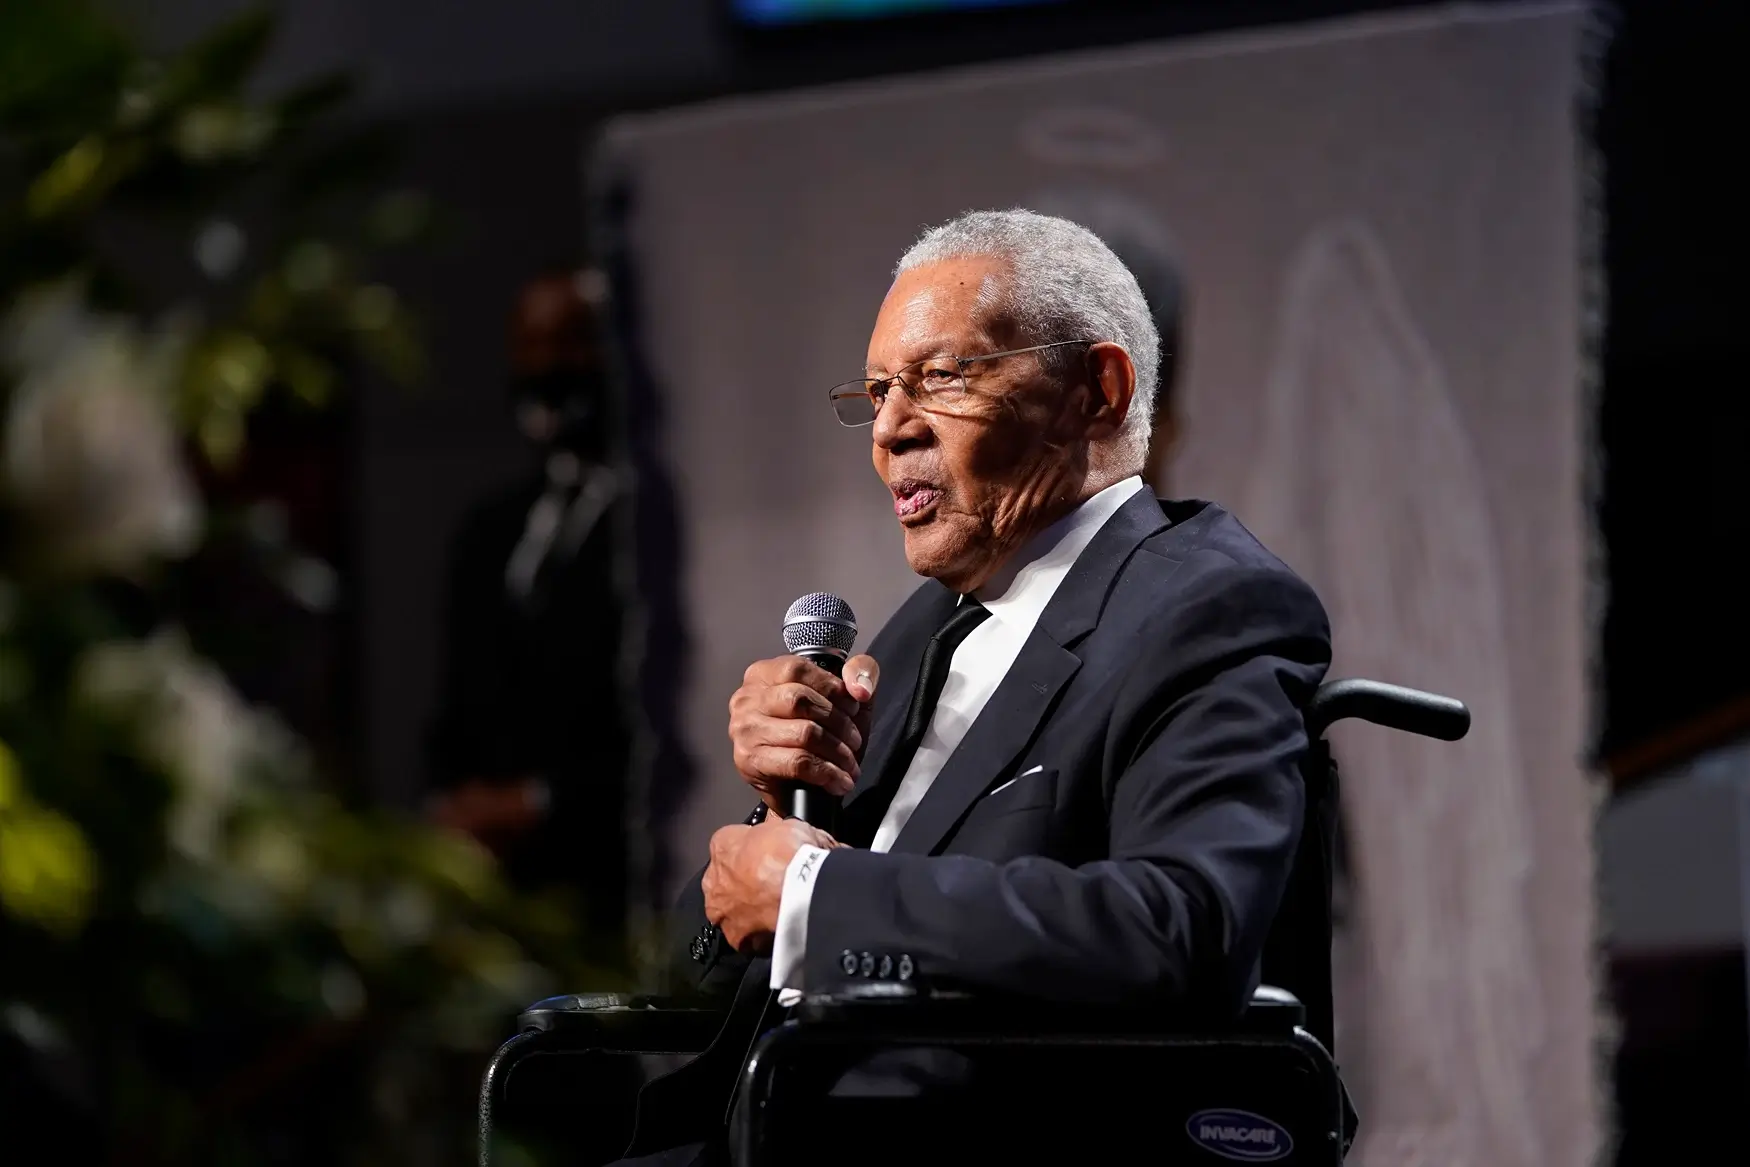 The Rev. William Lawson, pastor emeritus of Wheeler Avenue Baptist Church, of Houston speaks during a funeral service for George Floyd at The Fountain of Praise church Tuesday, June 9, 2020, in Houston.